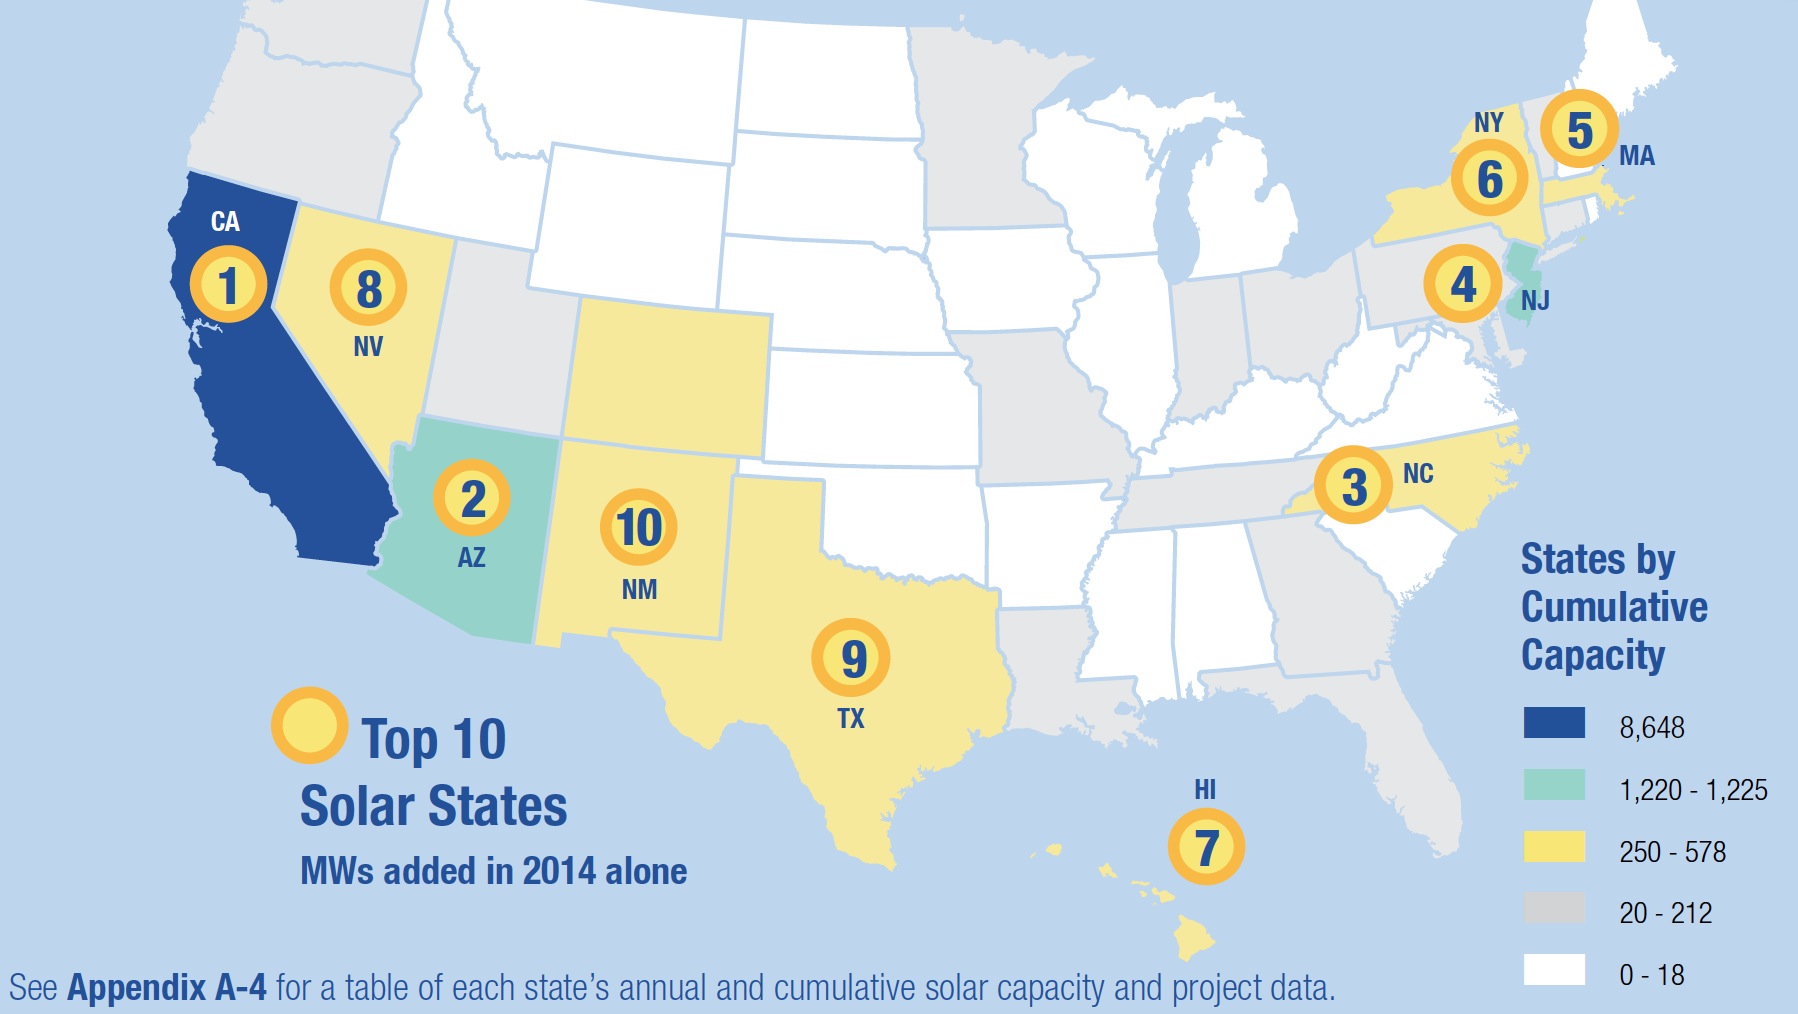 Top 10 Solar States: Megawatts added for 2014 alone